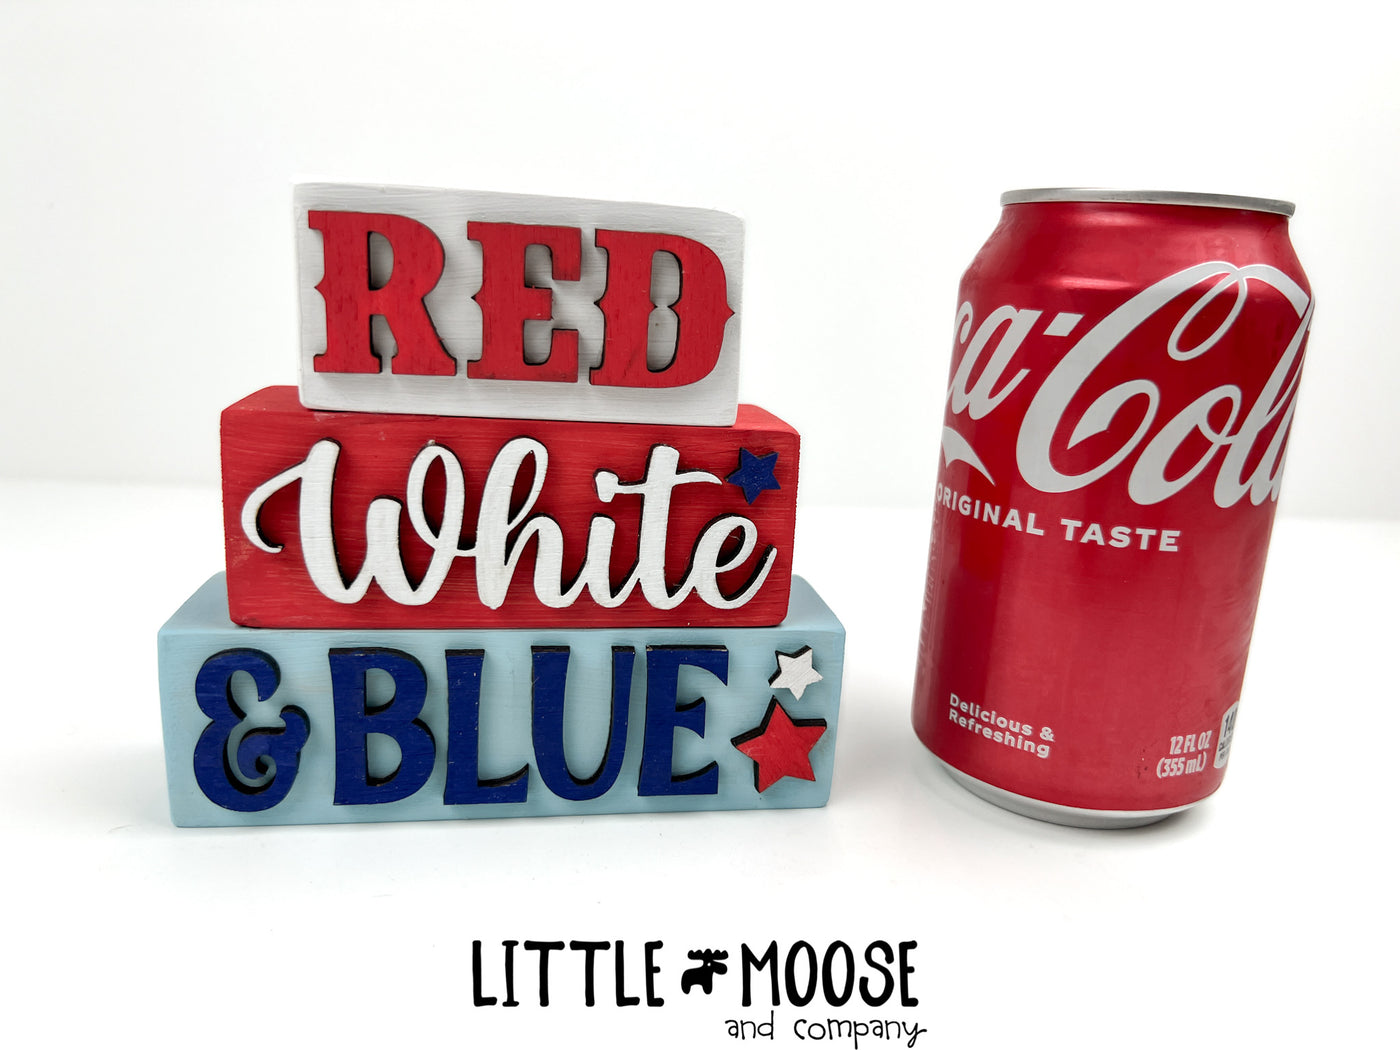 Word stacker - Red, White & Blue